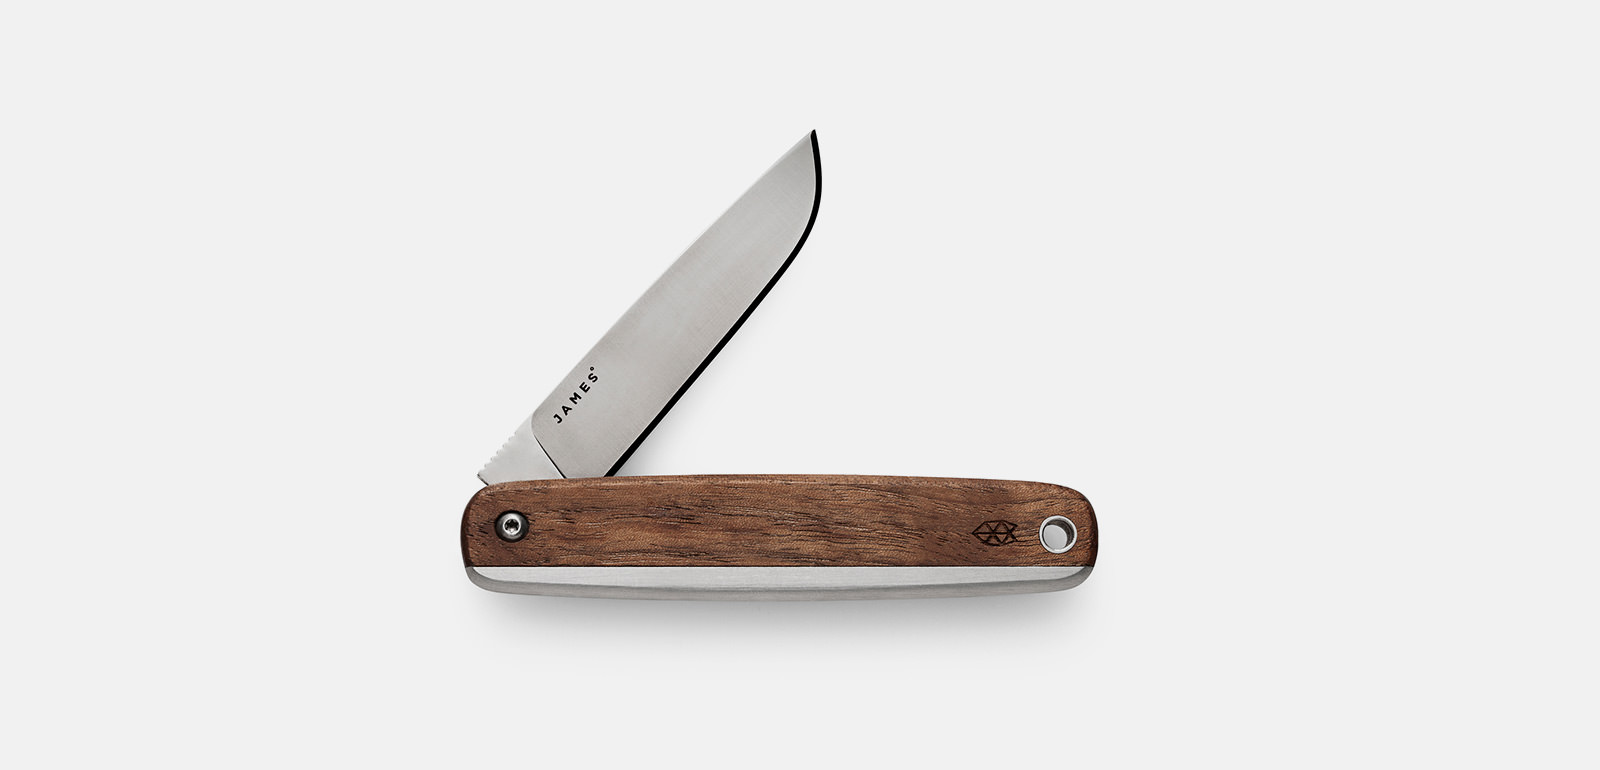 The James Brand Country Pocket Knife